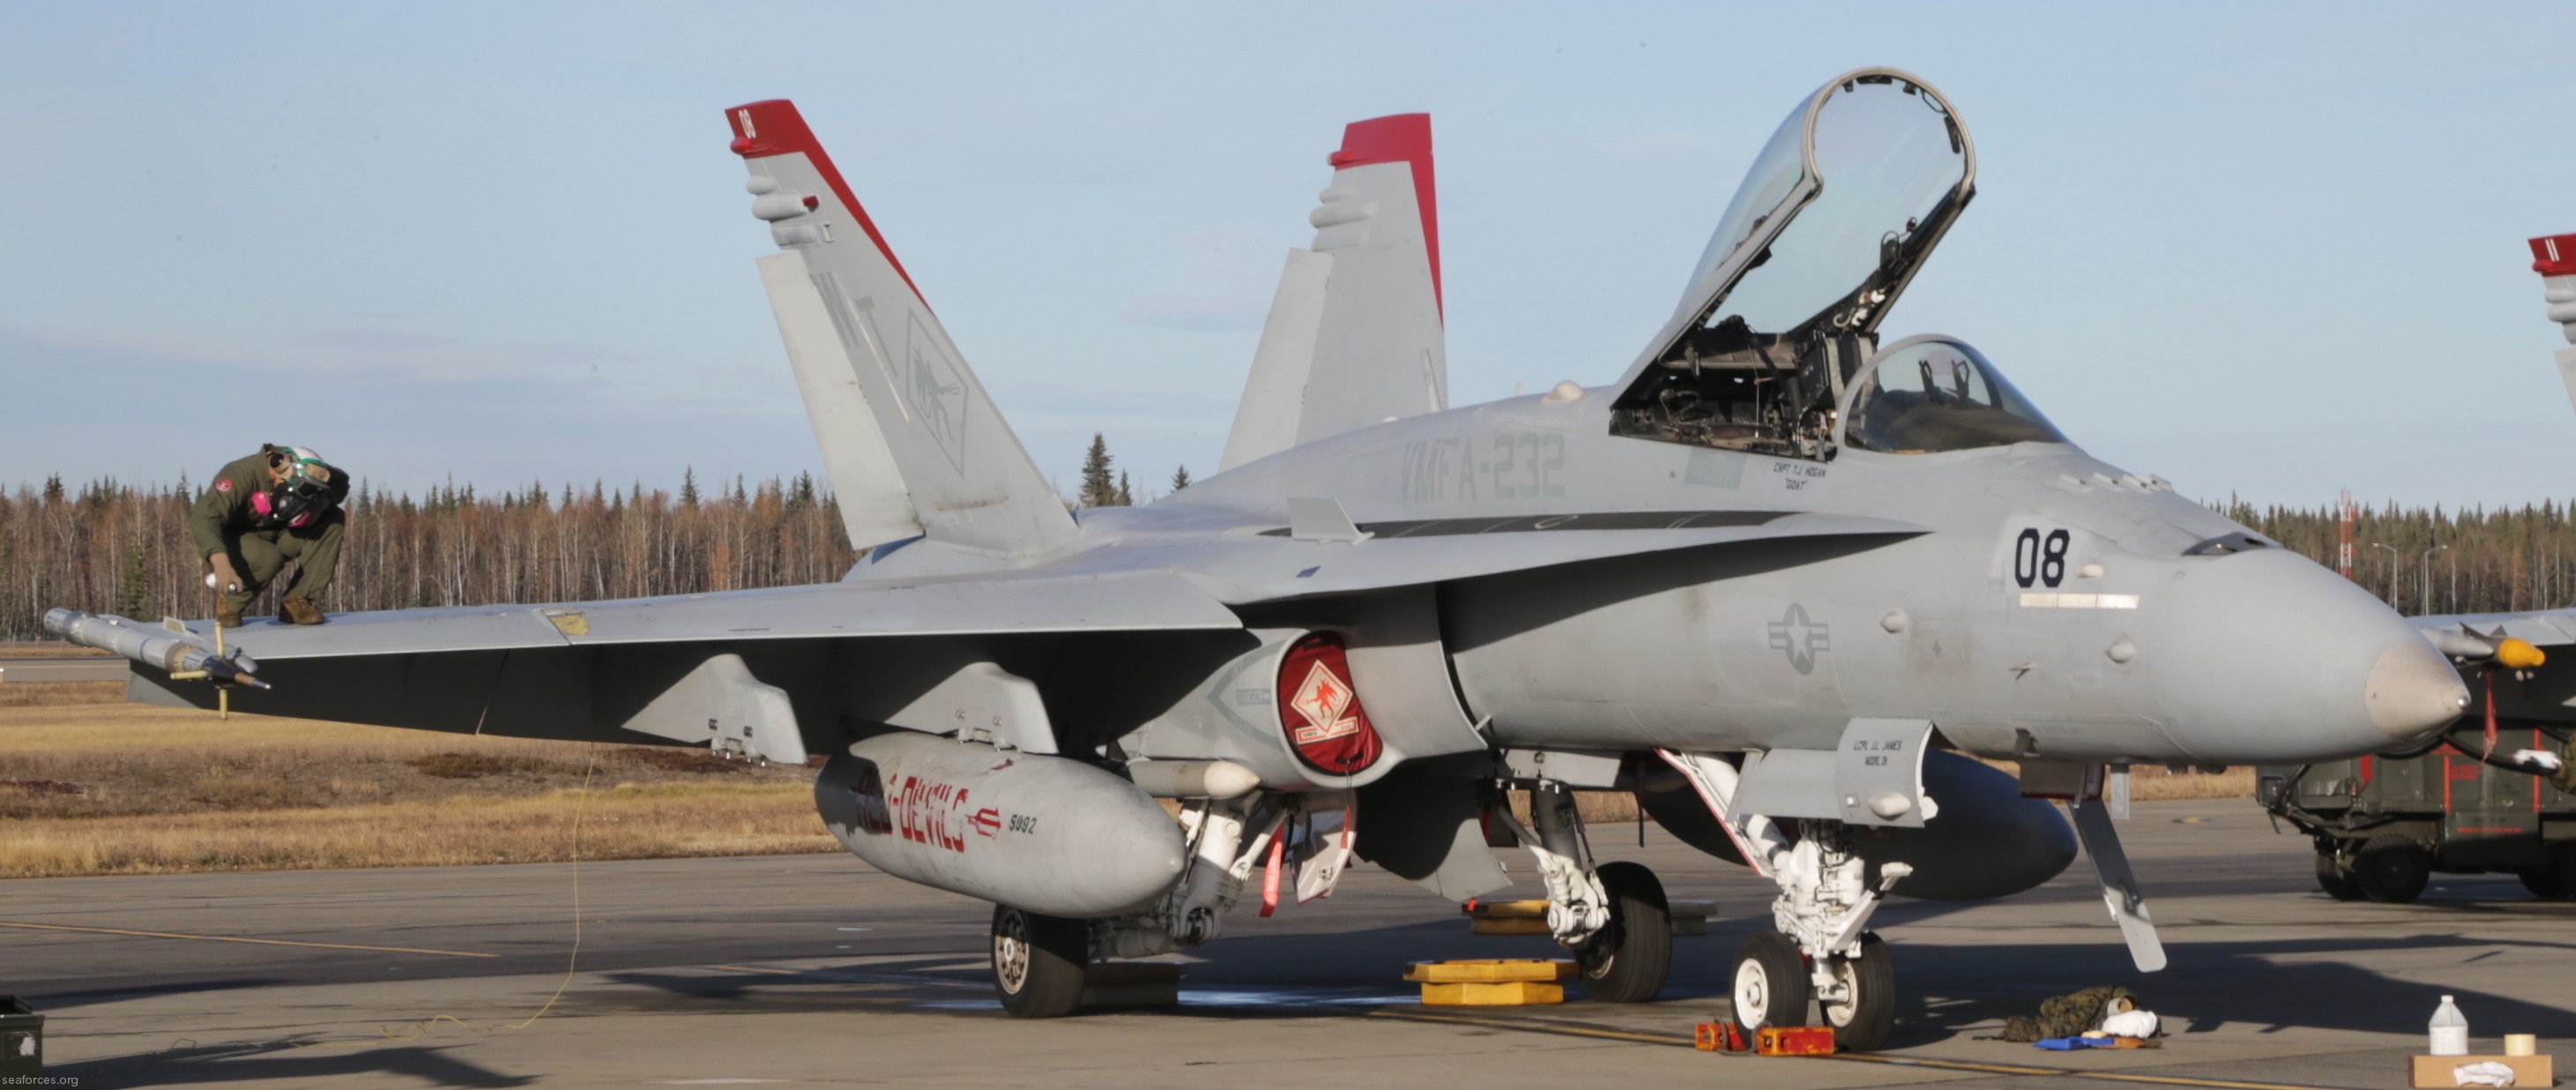 vmfa-232 red devils marine fighter attack squadron usmc f/a-18c hornet 60 exercise red flag alaska eielson afb